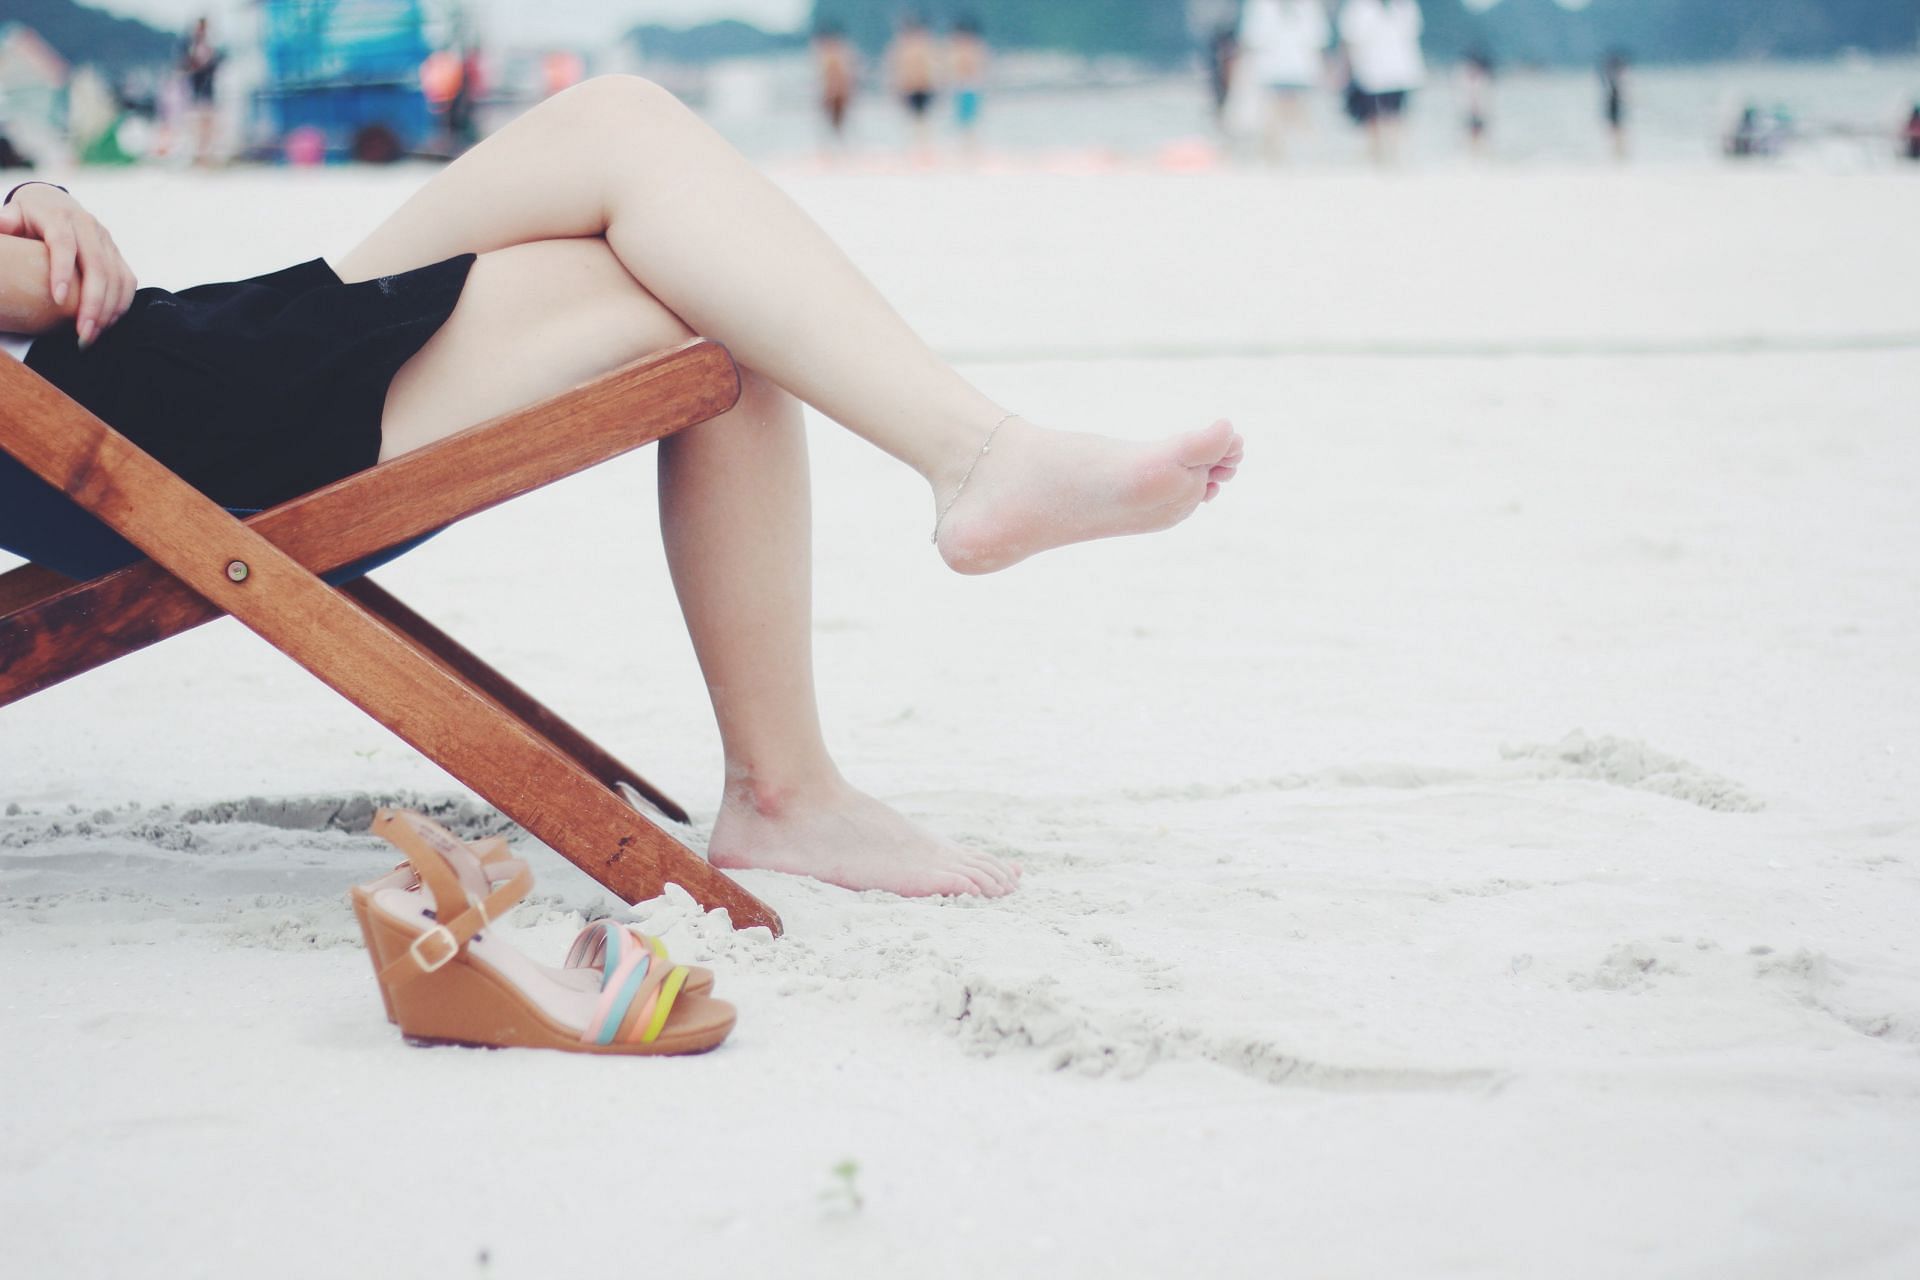 Cankles: What are They and How to Get Rid of Them? (Image via Unsplash / Auskteez Tran)